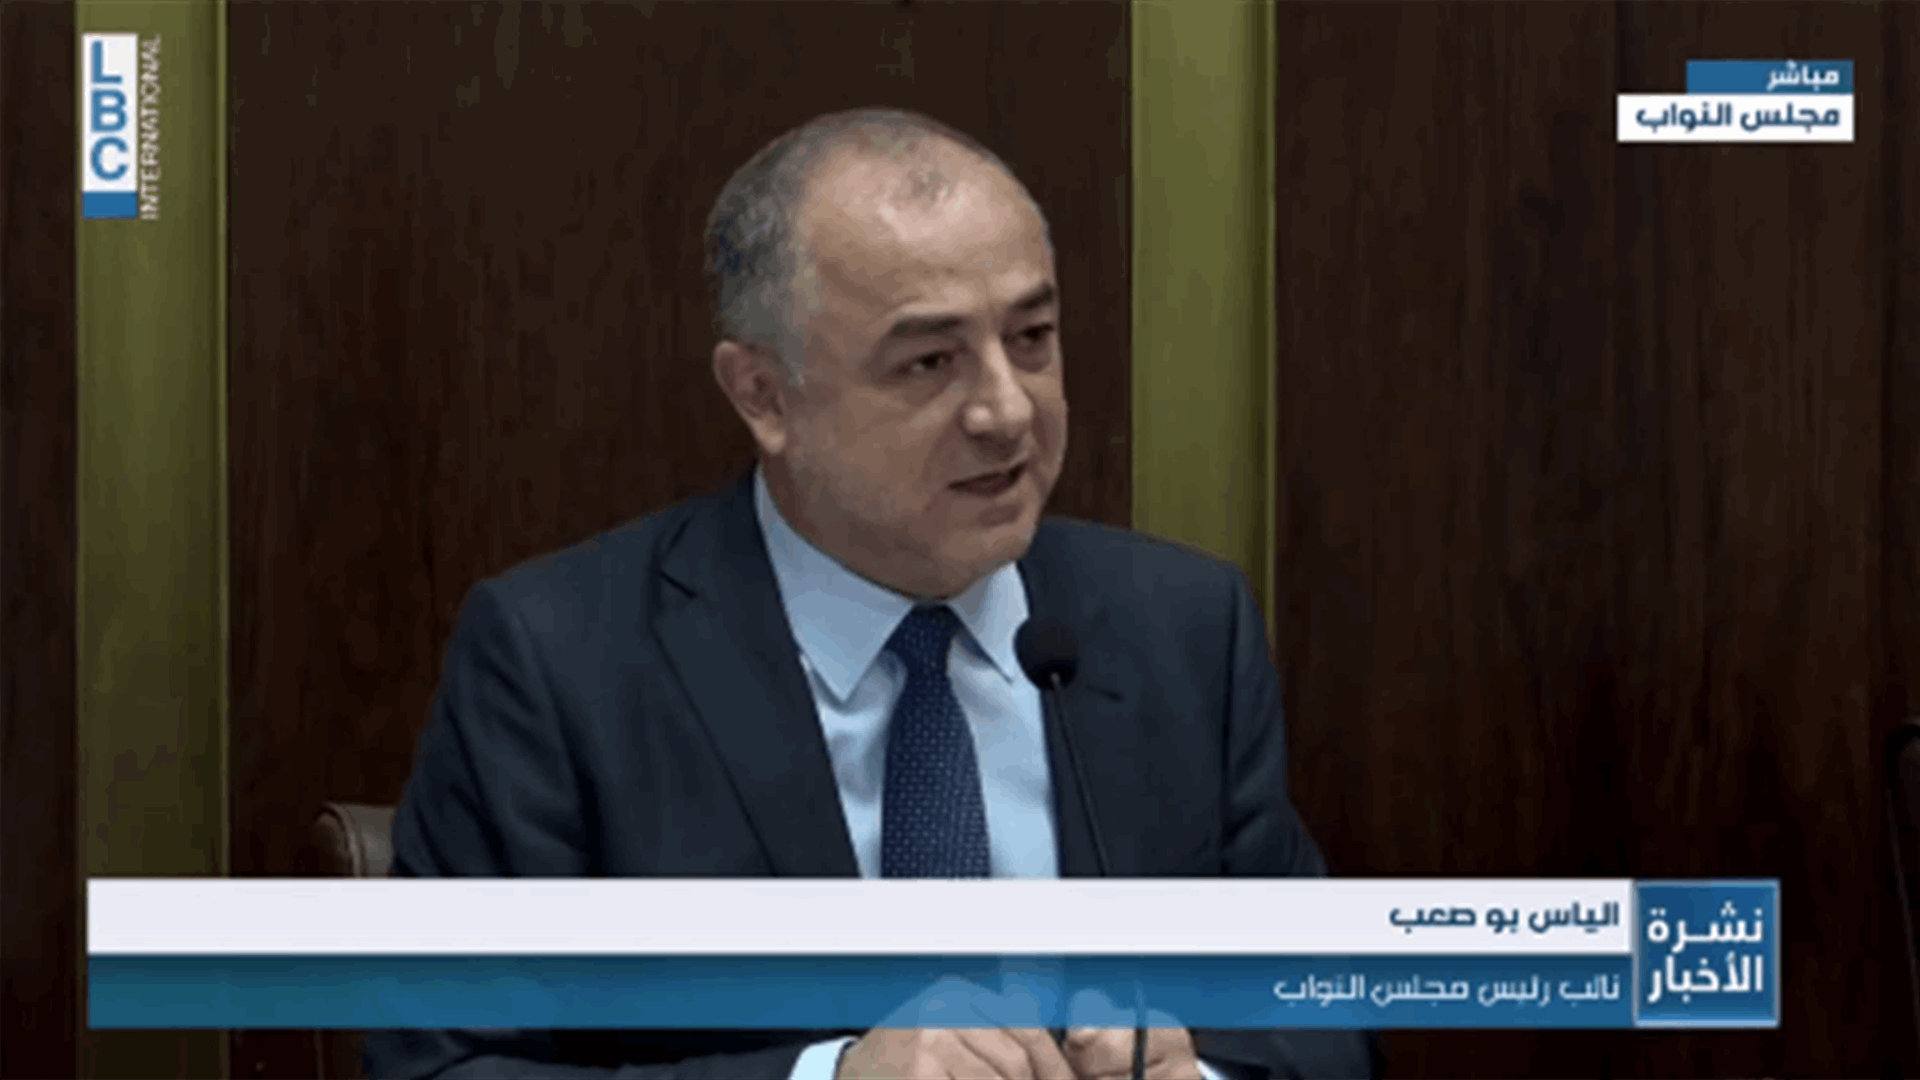 Bou Saab says he disagrees that capital control law is against depositors’ rights